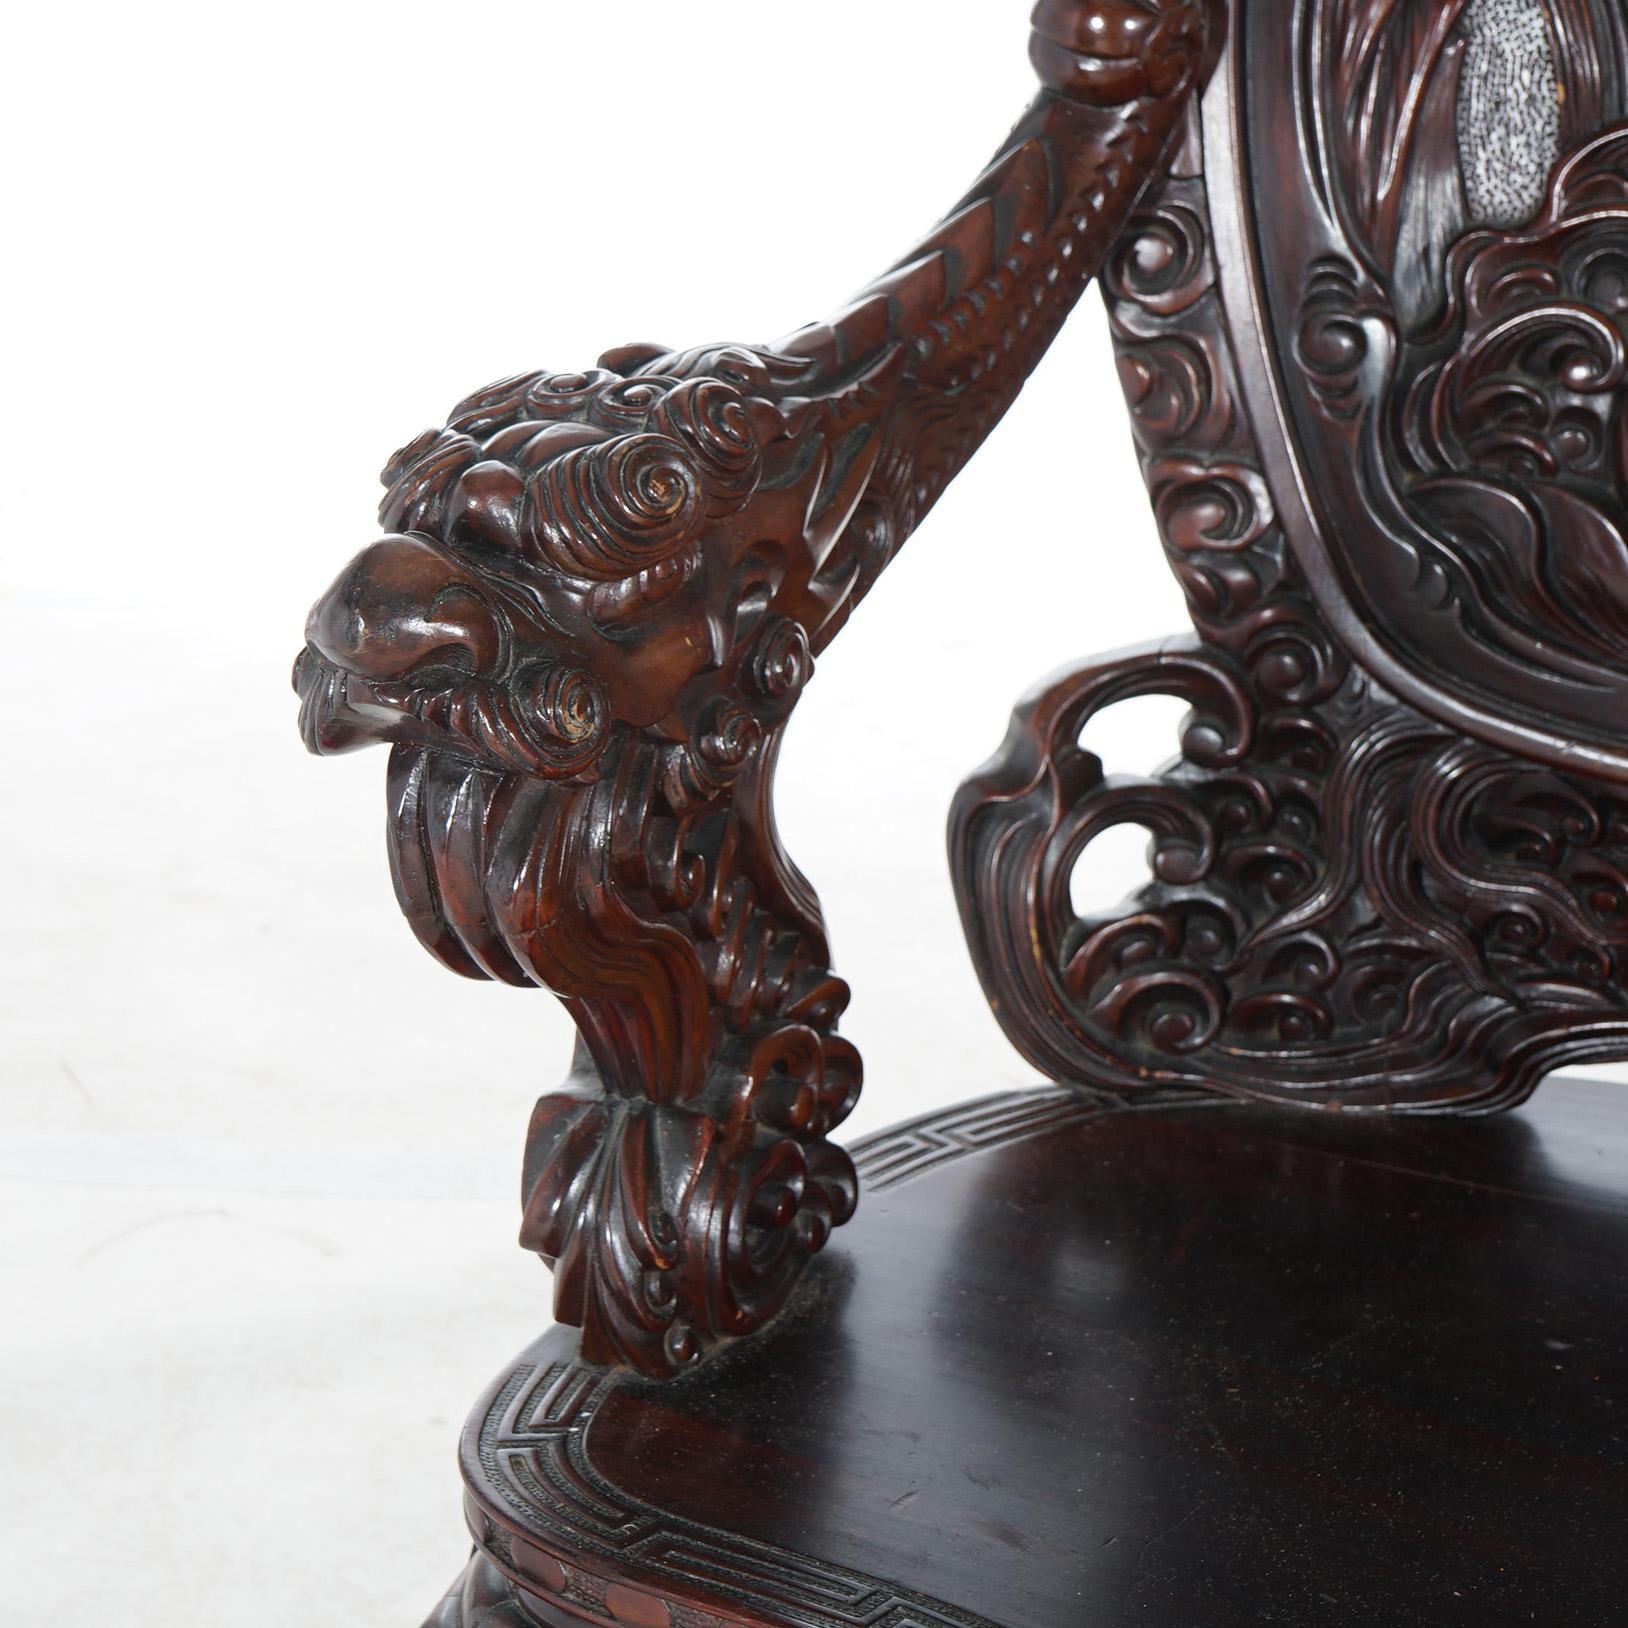 Antique Chinese Deep Carved Rosewood Figural King Throne Chair with Dragons 1920 For Sale 4